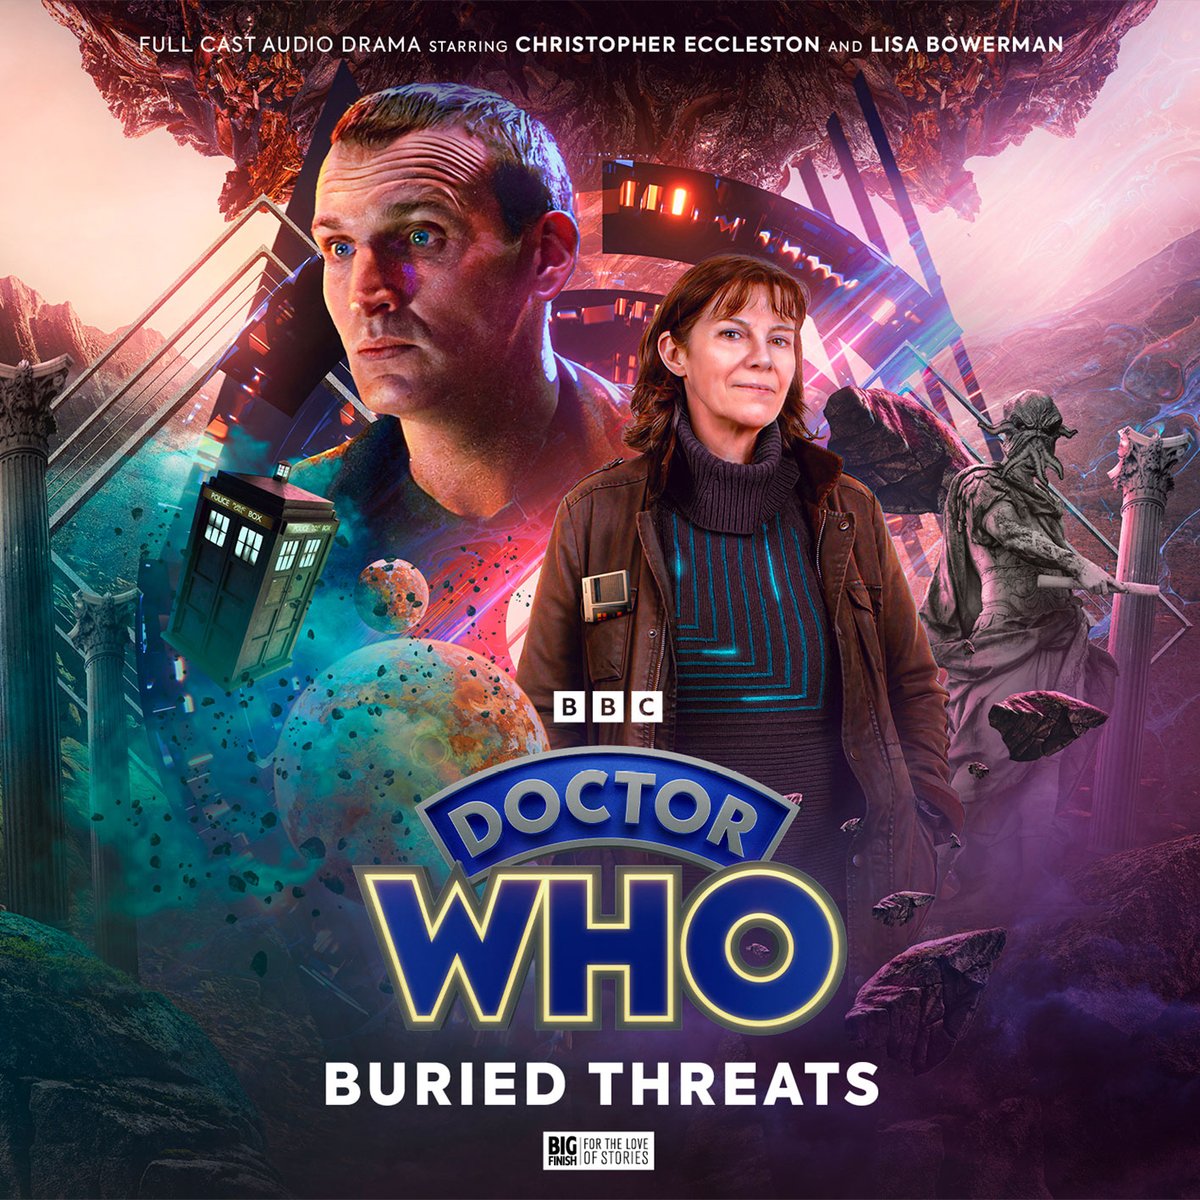 Full marks and high praise from @AlasdairStuart taking over the reins of the 9th Doctor @bigfinish reviews @lisamcmullin @mwrightwriter @mattief @TheLisaBowerman @audiolady51 @HelenGoldwyn @ThatManMeadows @MrRobValentine scifibulletin.com/doctor-who/rev…